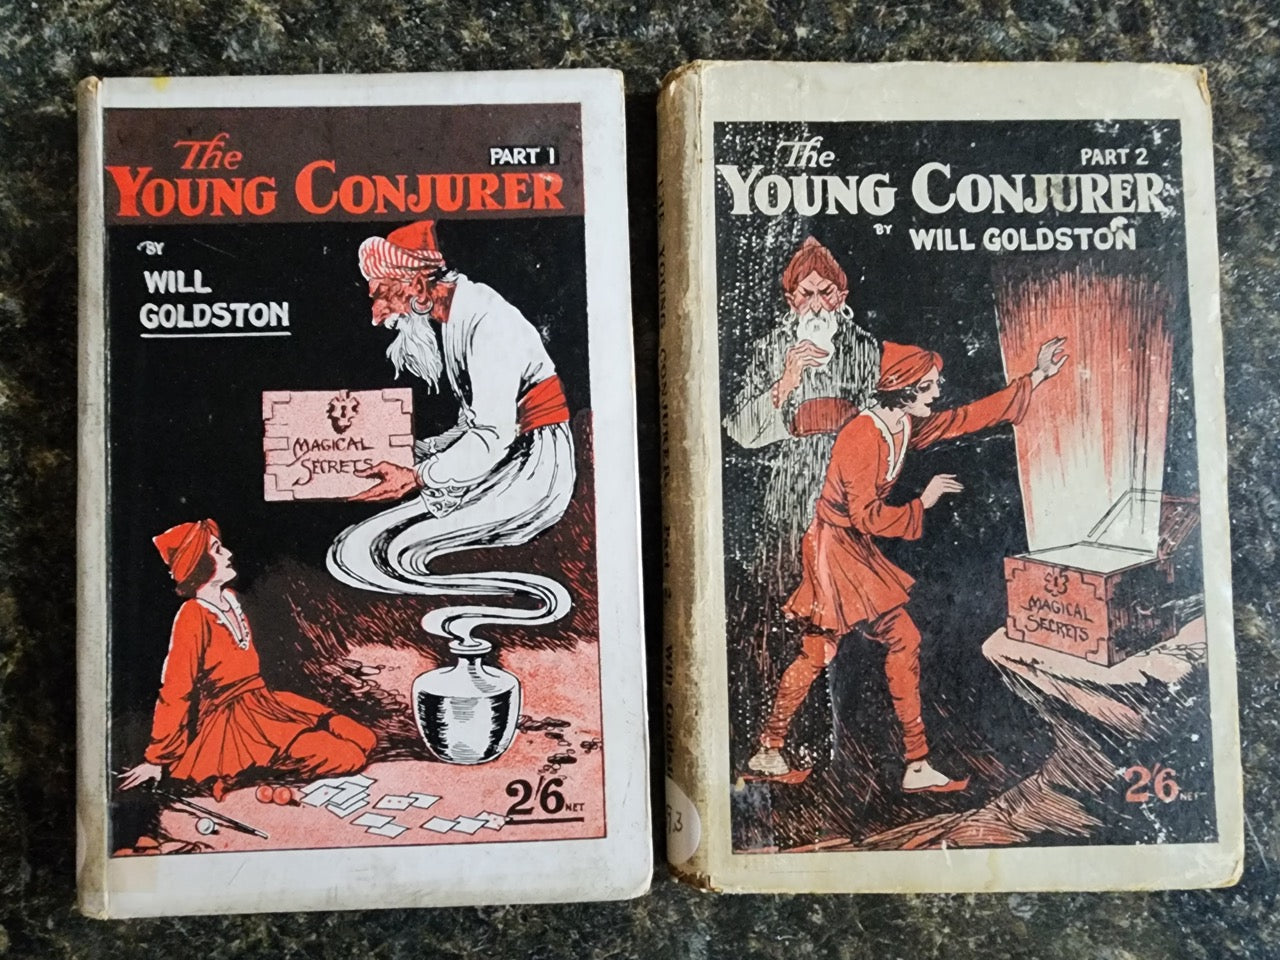 The Young Conjurer Parts 1 and 2 - Will Goldston